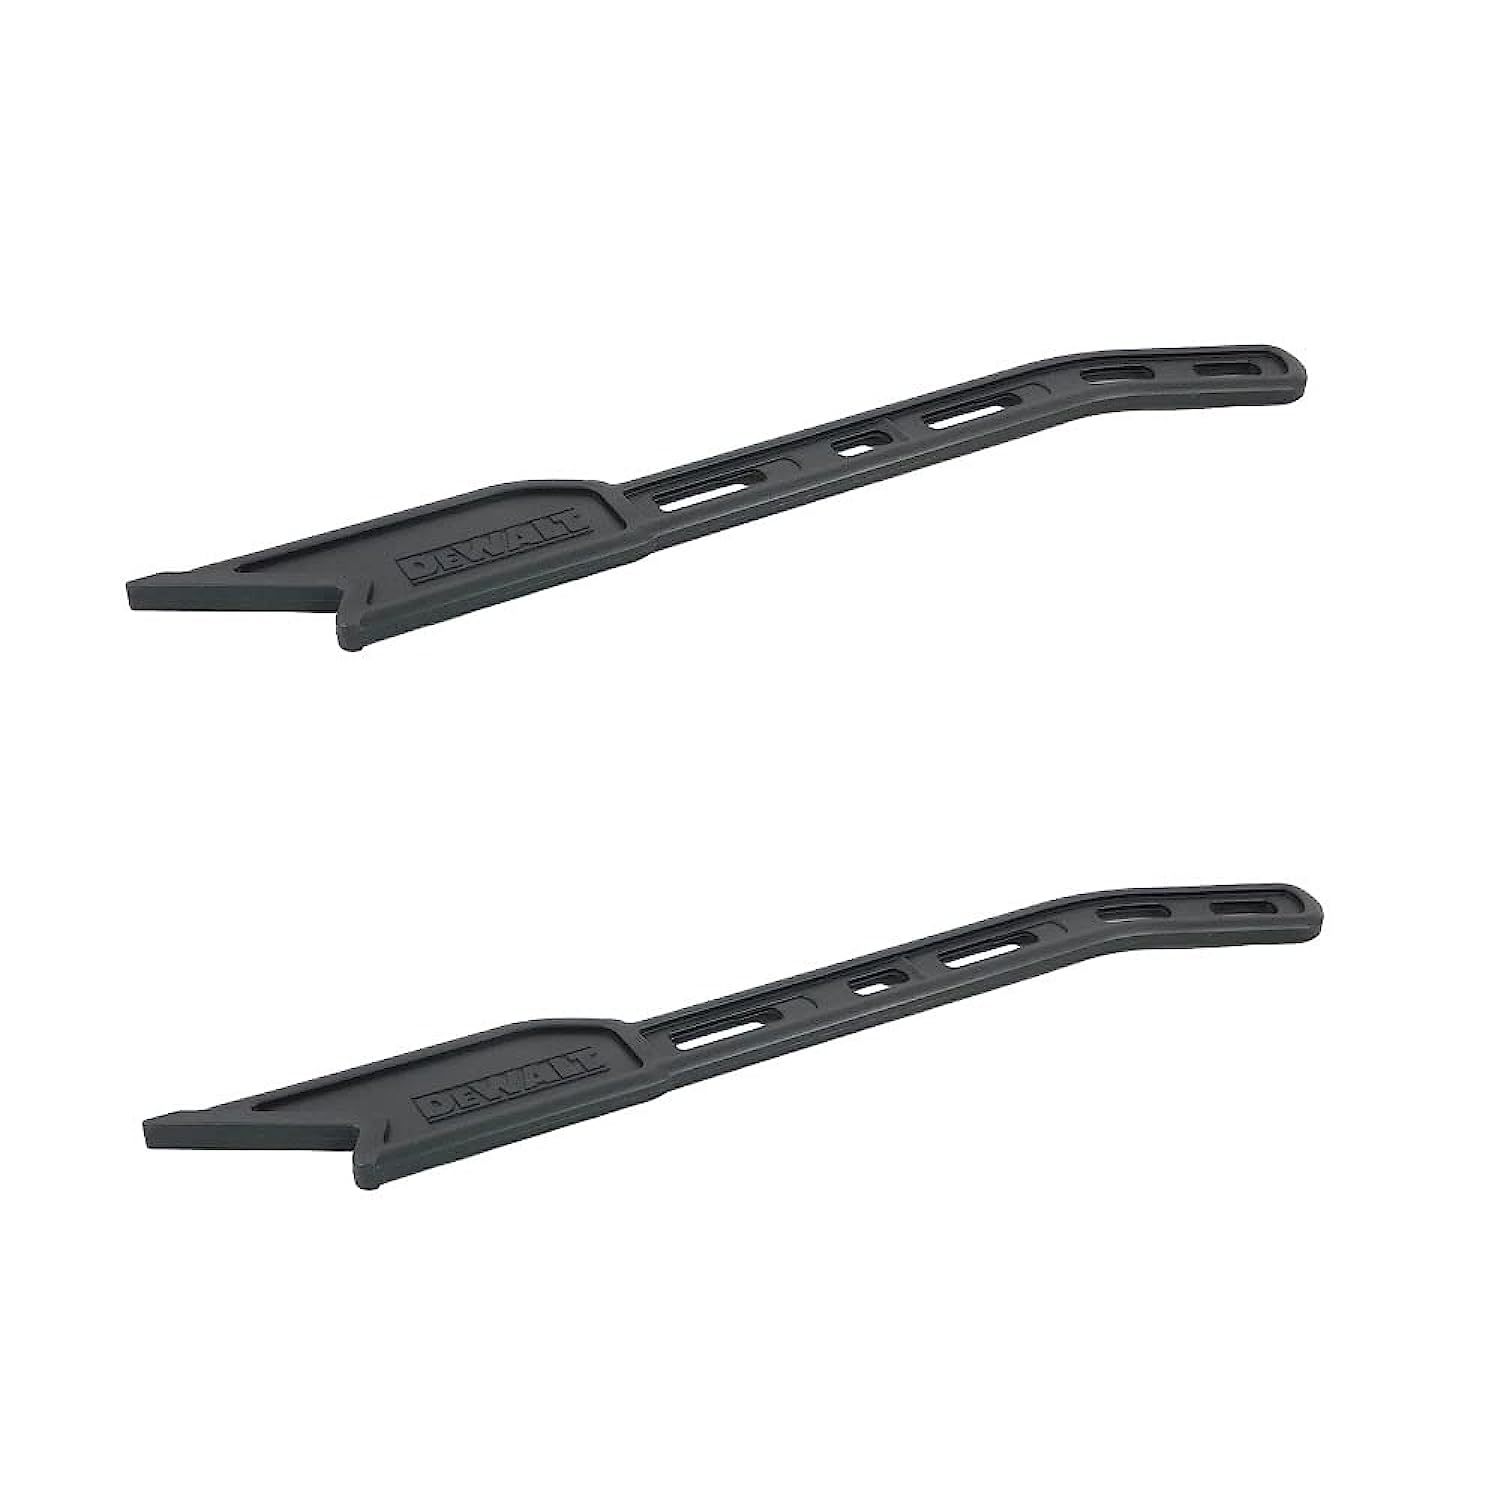 Primary image for Dewalt DW744X Table Saw OEM Replacement (2 Pack) Push Stick # A24507-2pk